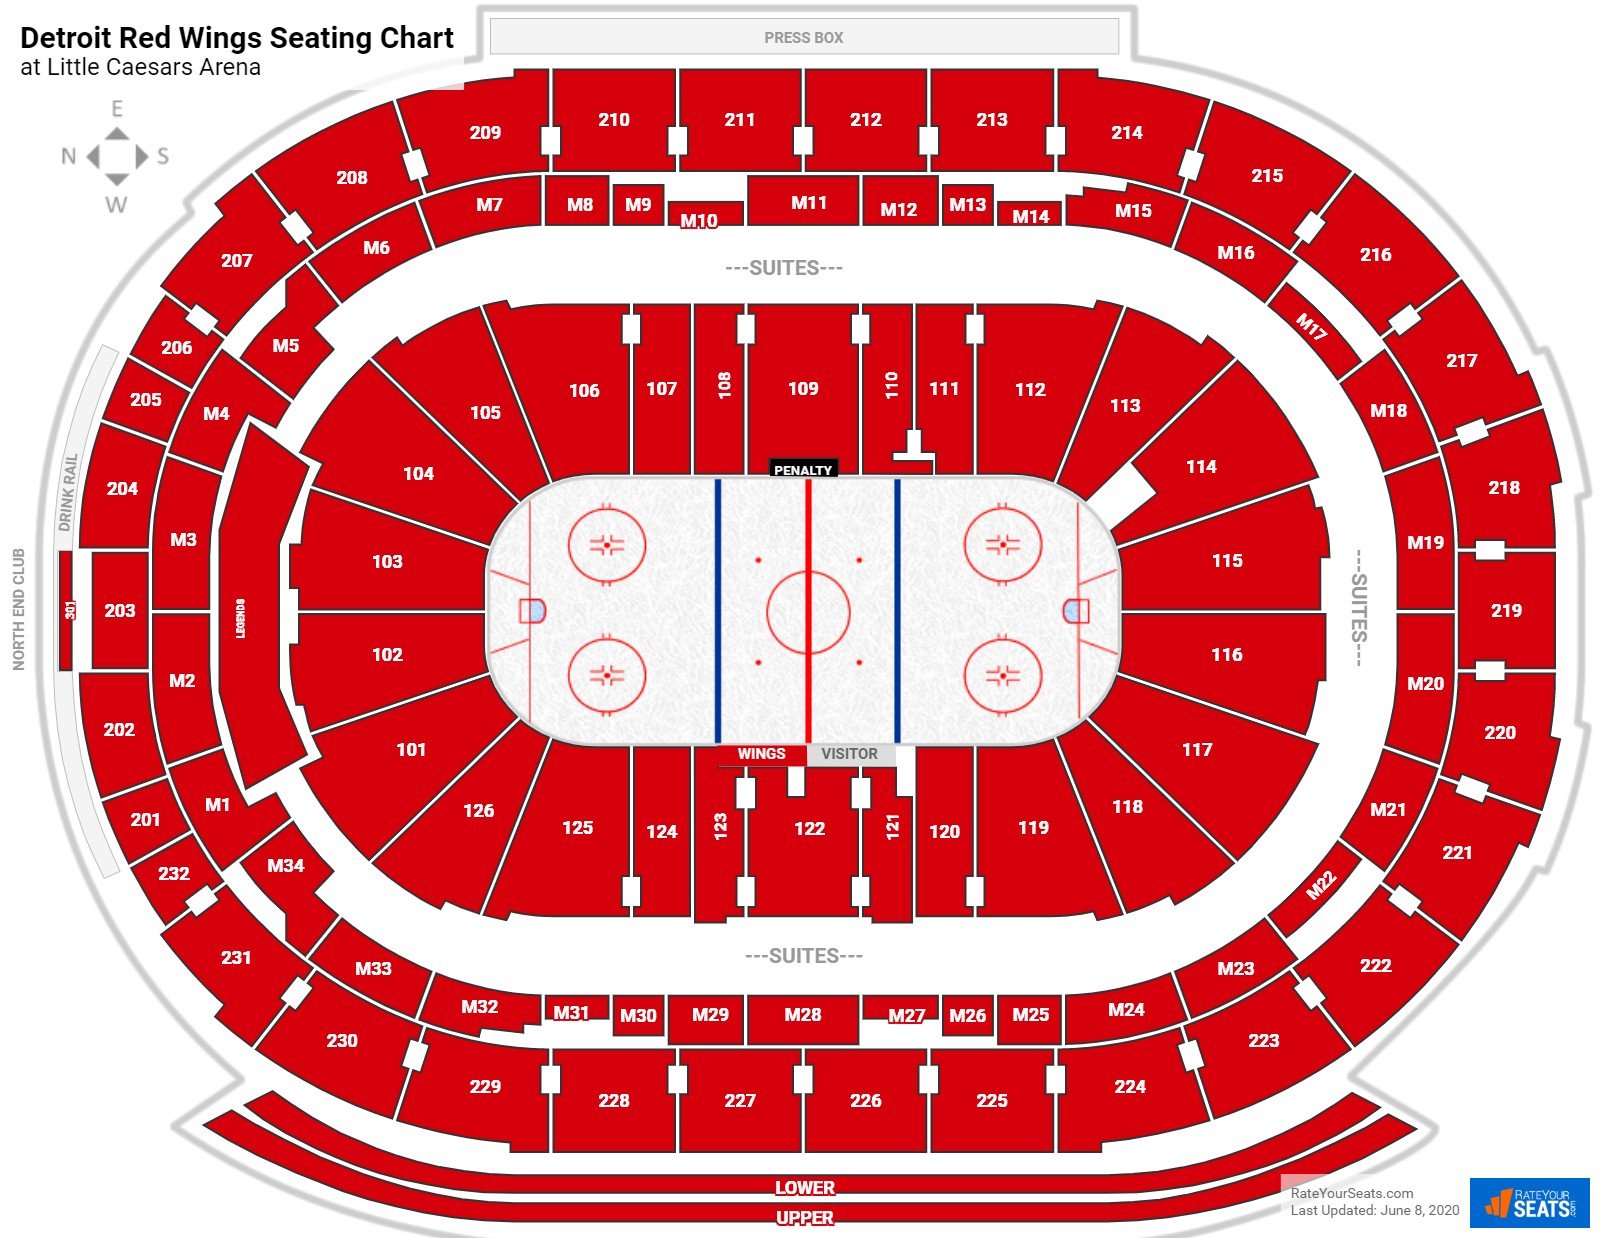 Little Caesars Arena Seating Charts